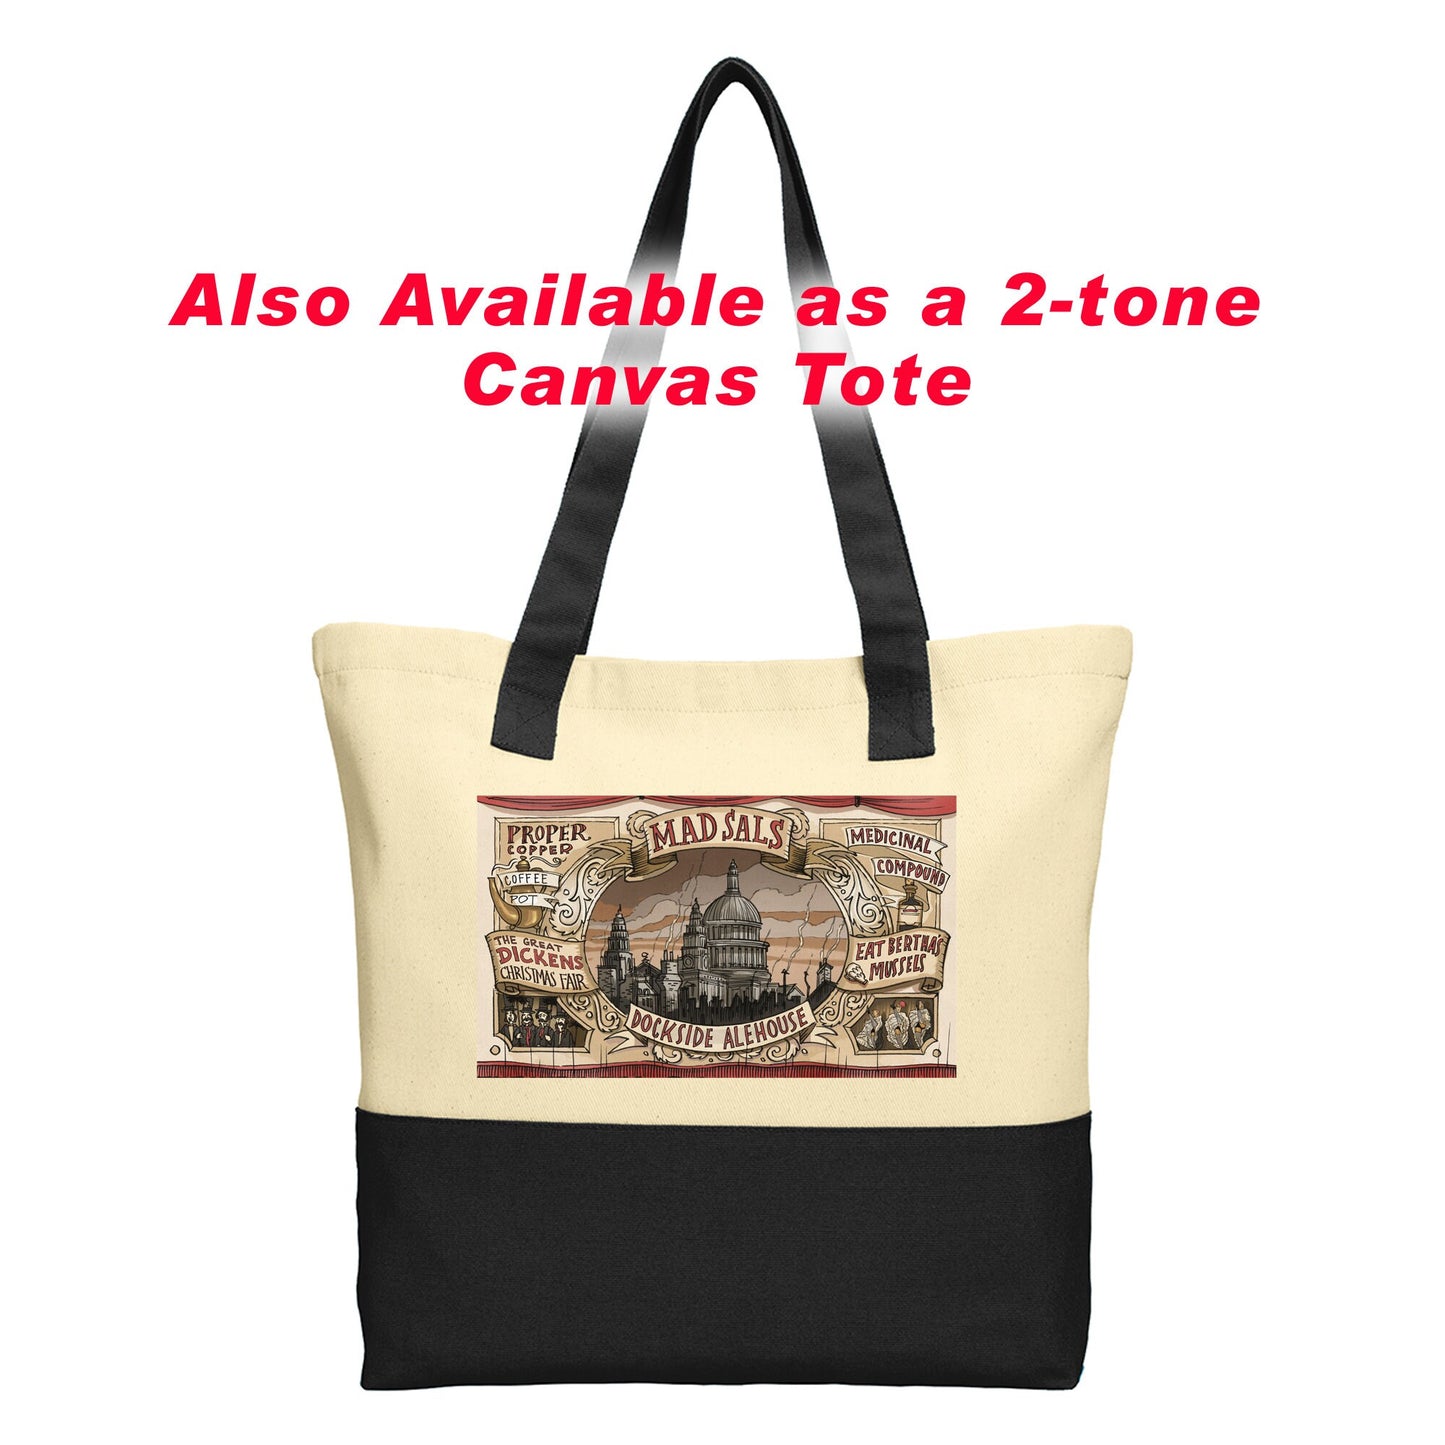 Mad Sals Zippered Tote / Dickens At Home Souvenir Merchandise / Dickens Christmas Fair